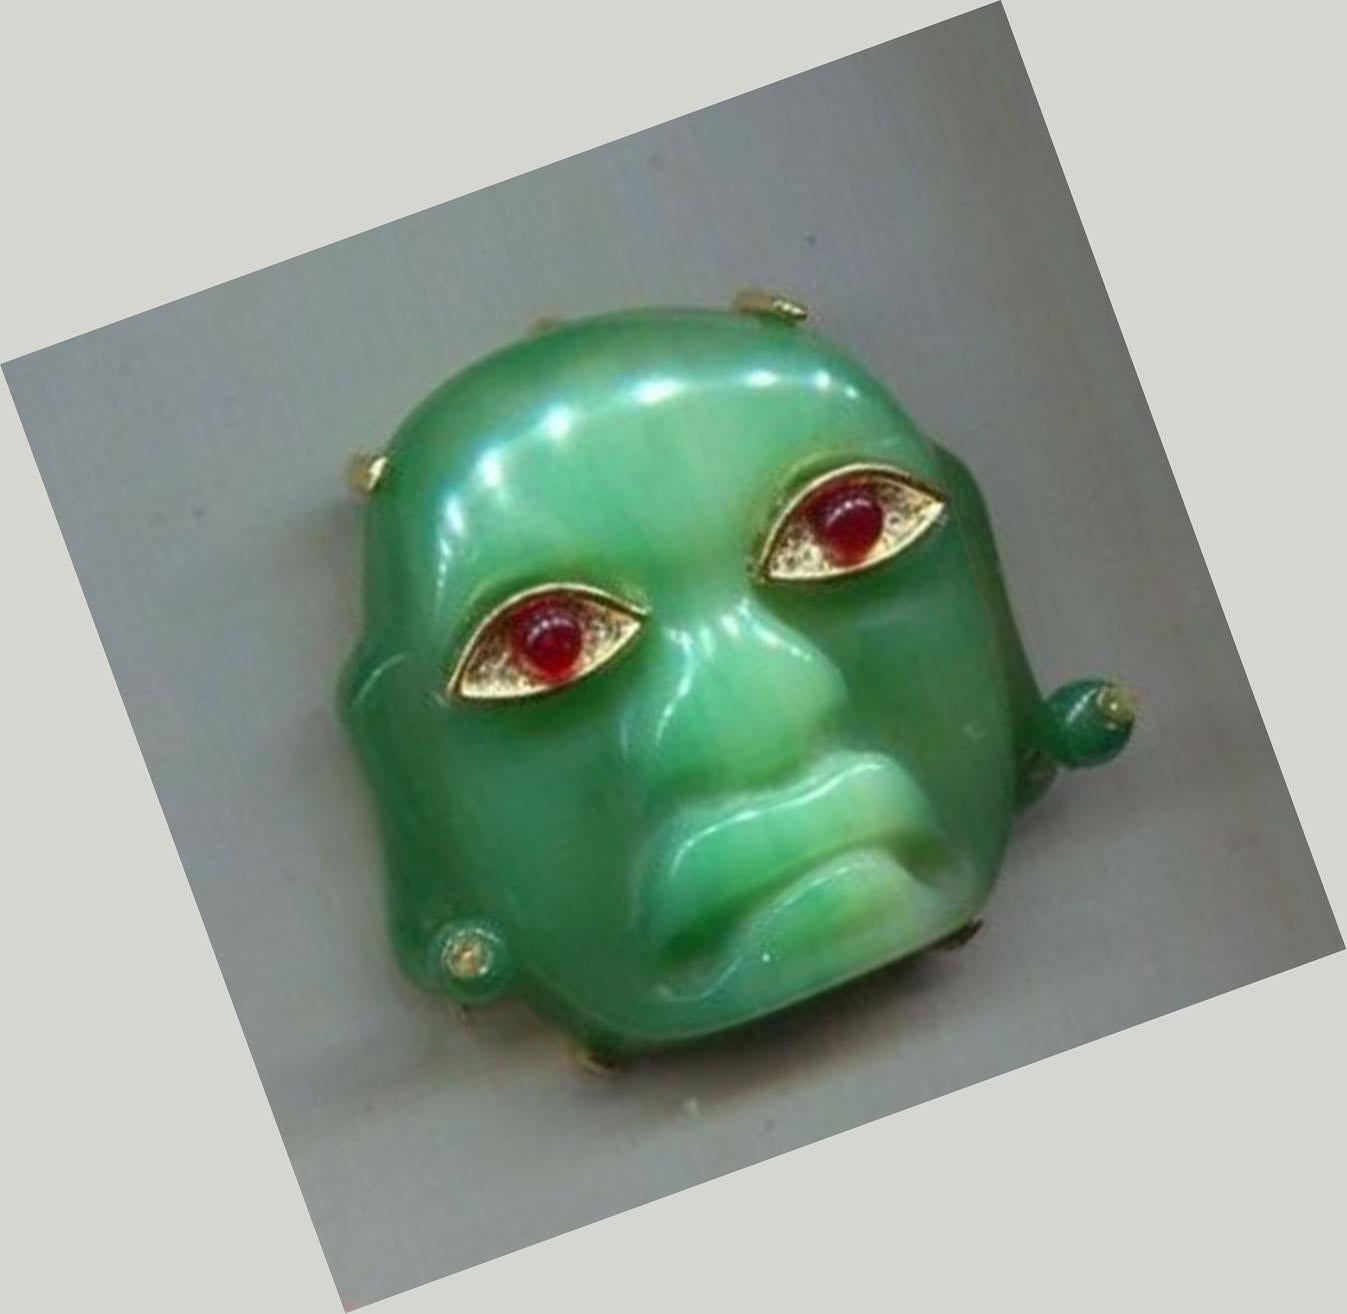 Awesome Kenneth J Lane Exotic carved Lucite Jade Brooch/Pendant with the true appearance of Natural Jade. Signed on reverse: KJL. Approx. size: 2